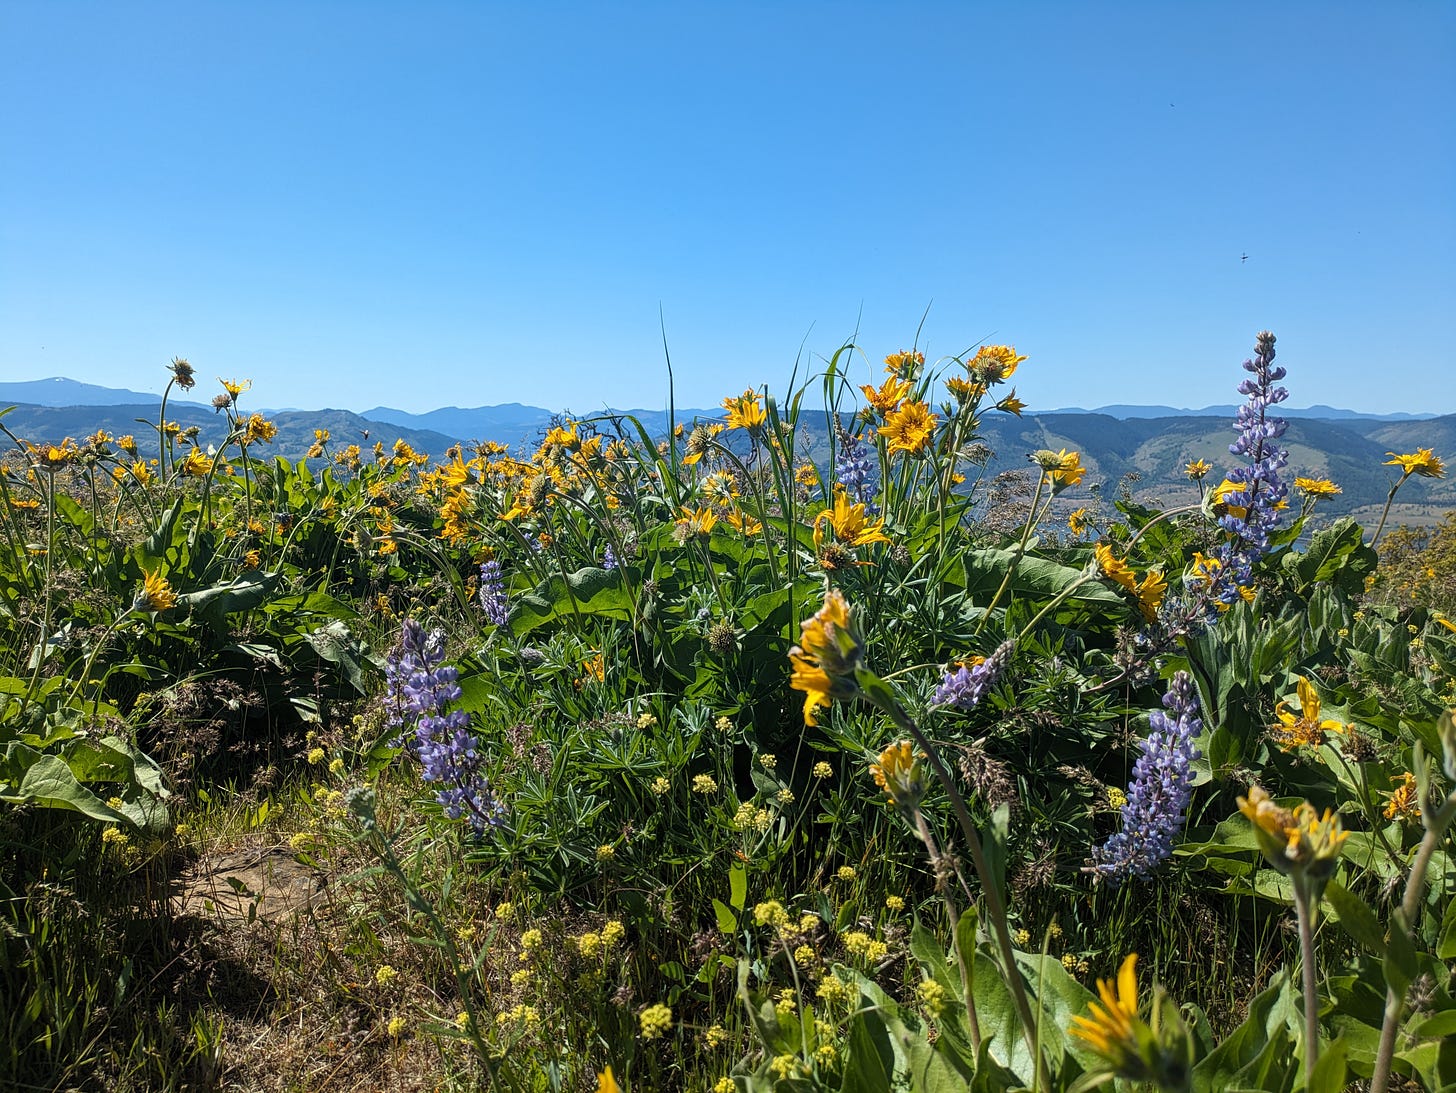 a field of daisies and lupines, with a mountain range in the background